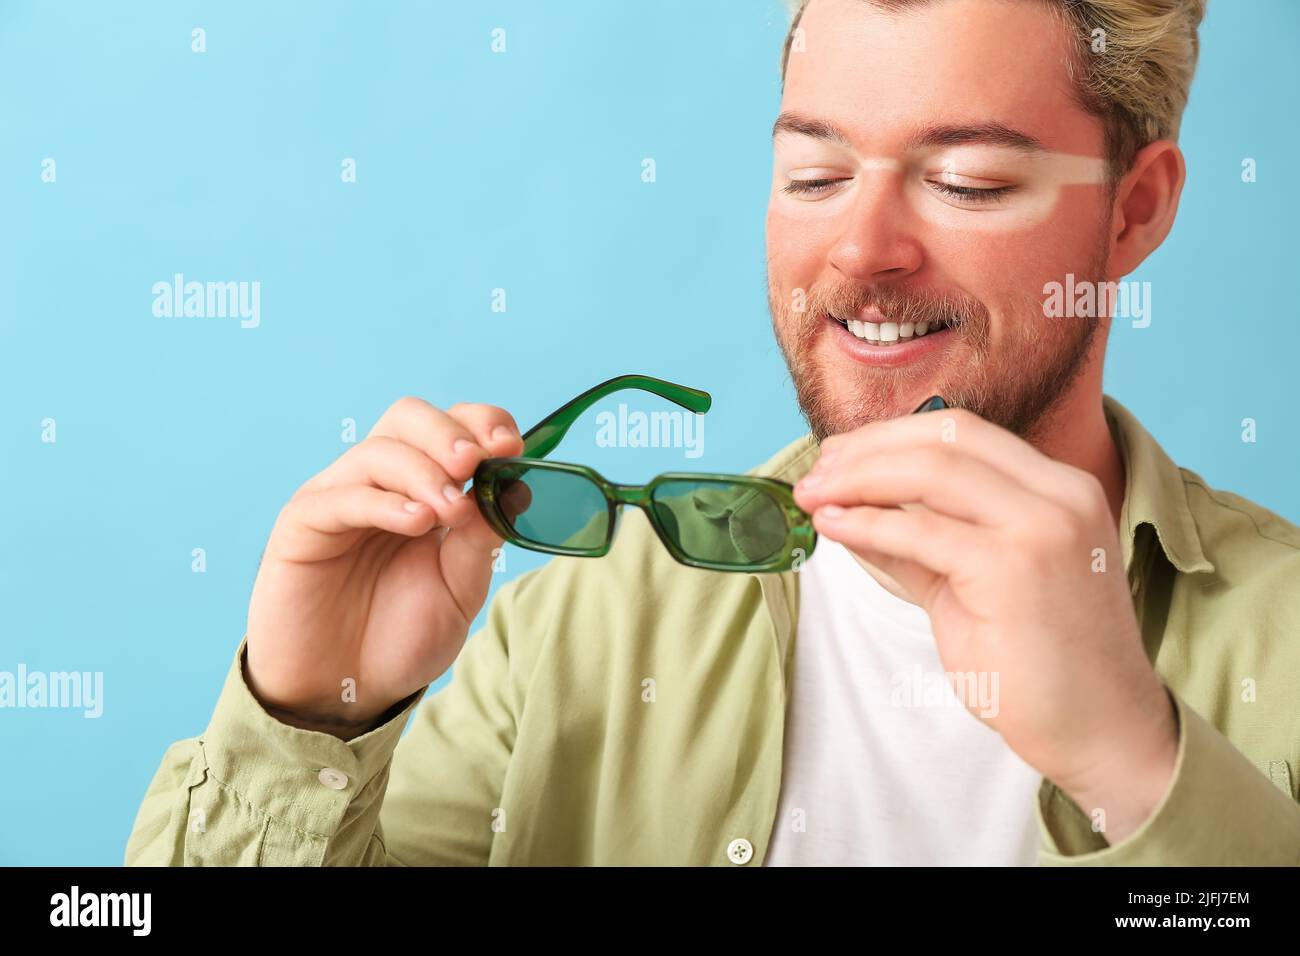 Happy young man with sun tanned skin and sunglasses on blue background Stock Photo